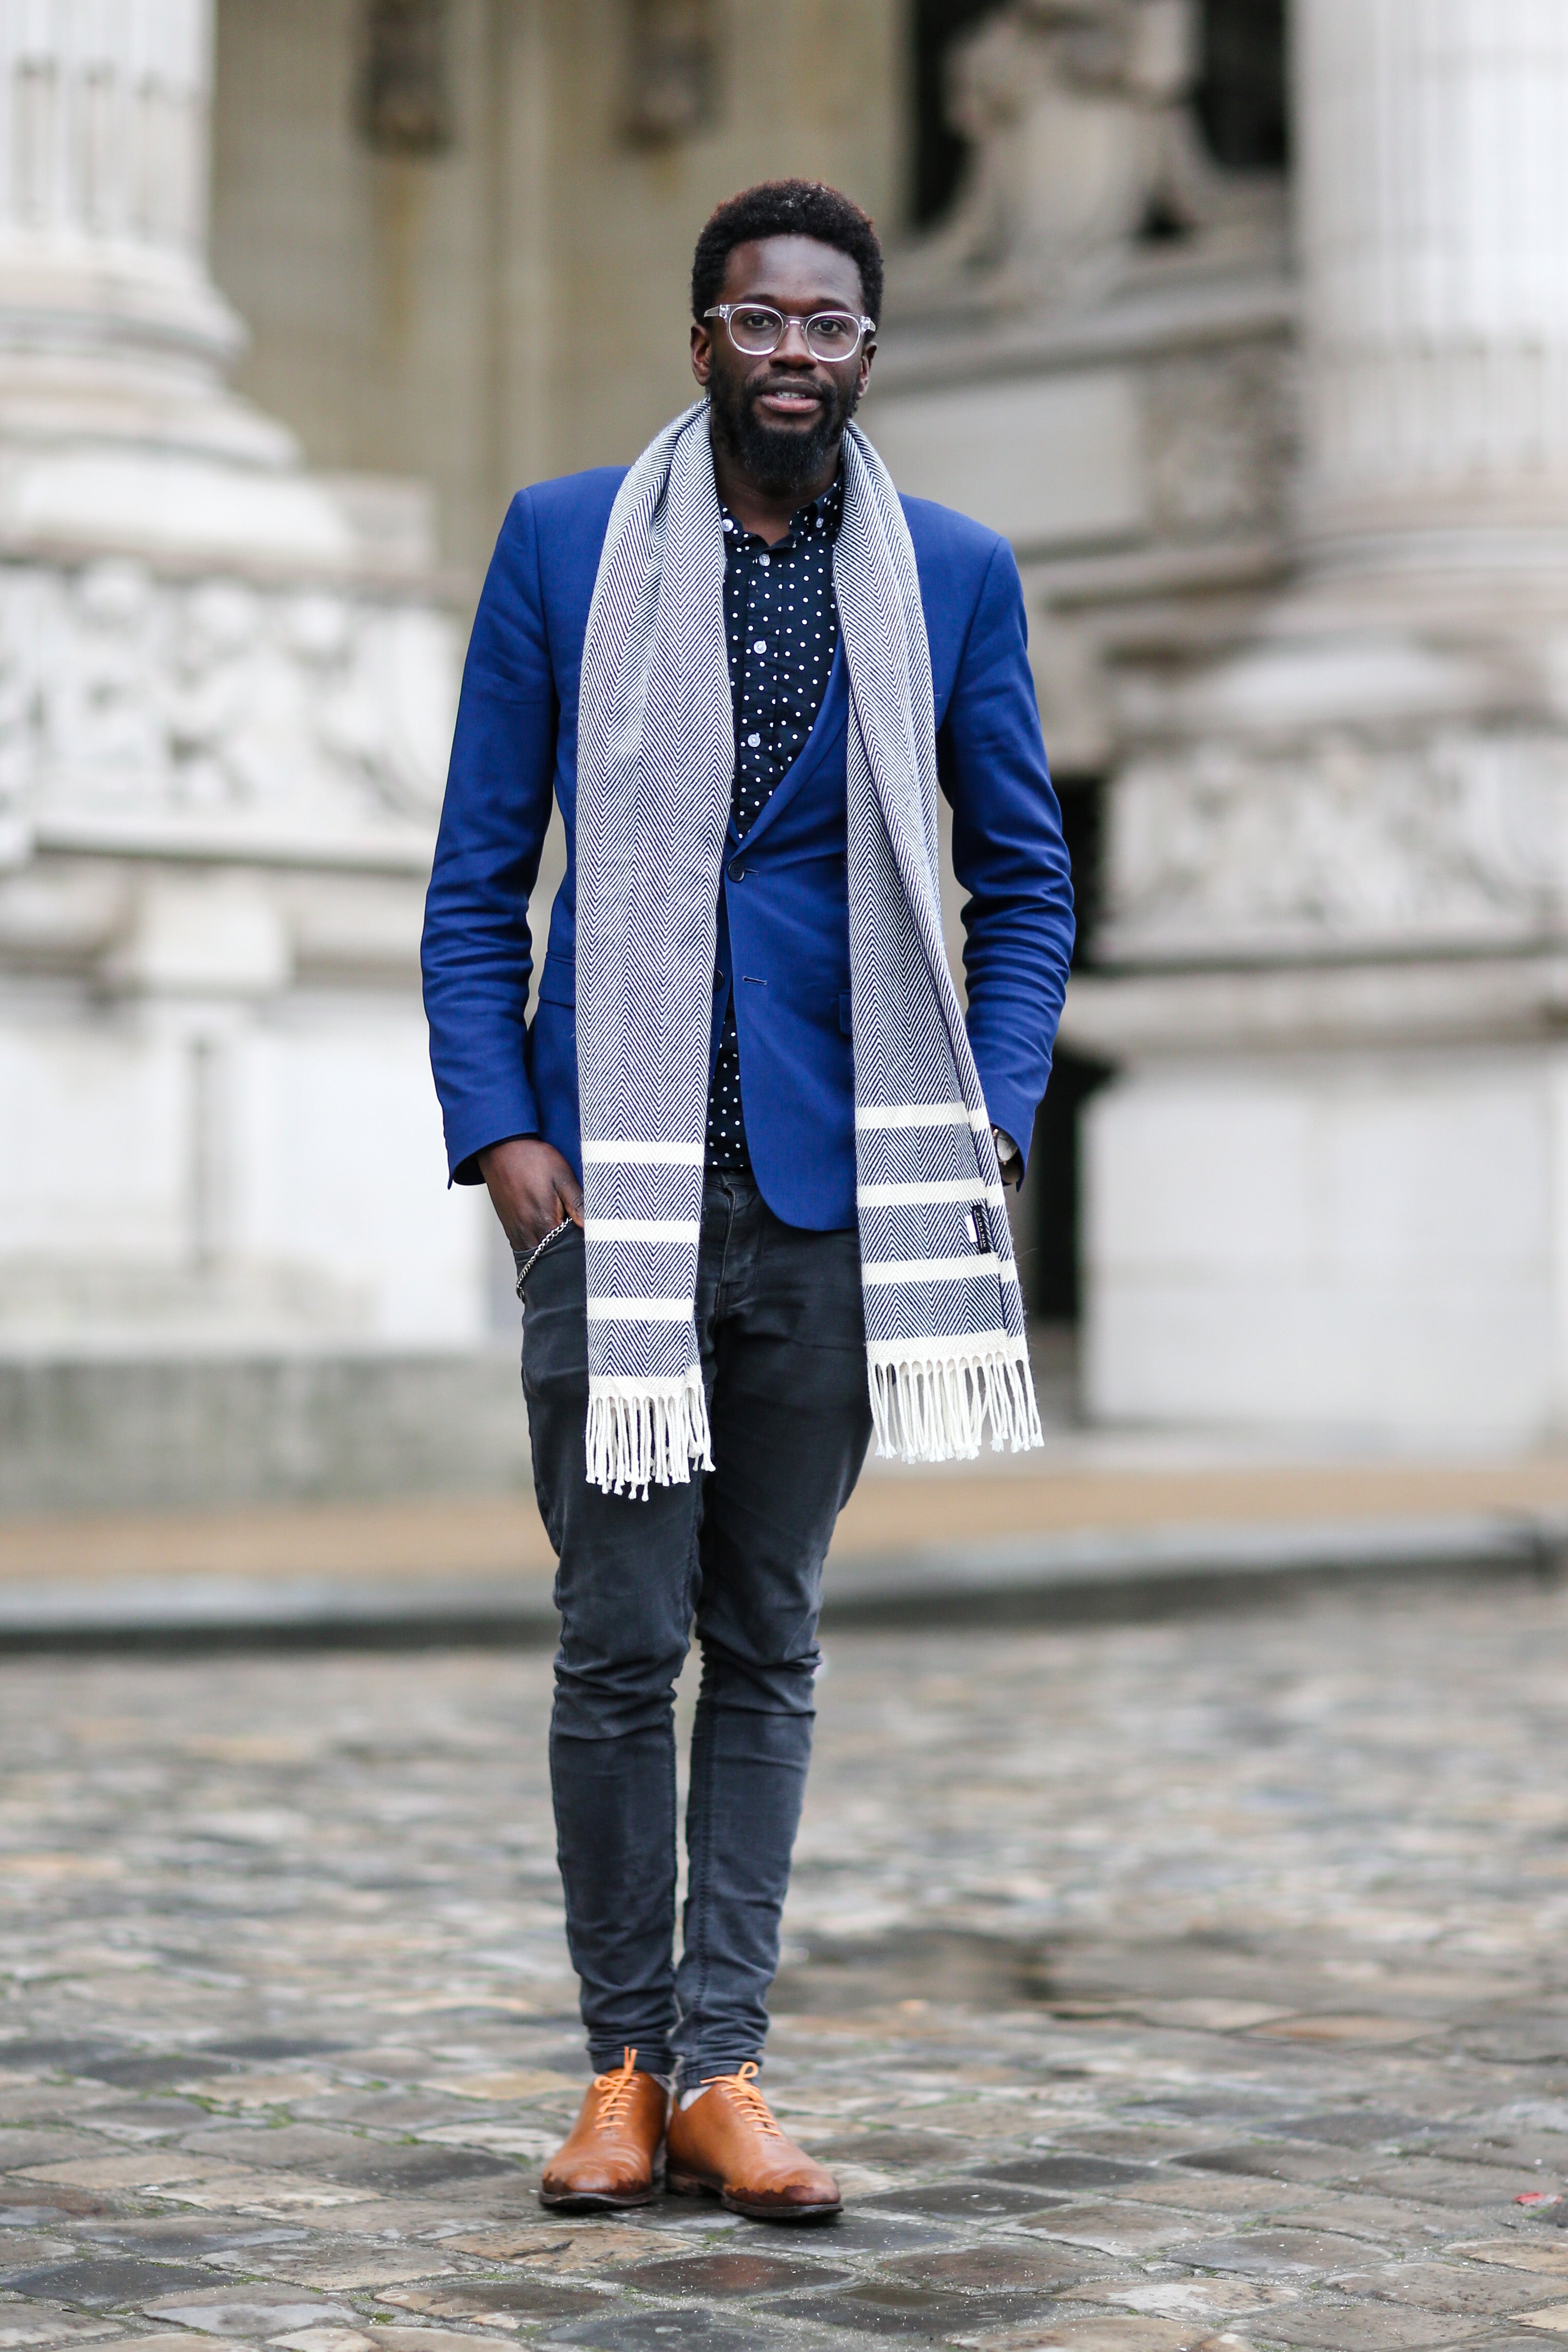 Fashion’s Finest Take To The Streets During Paris Fashion Week